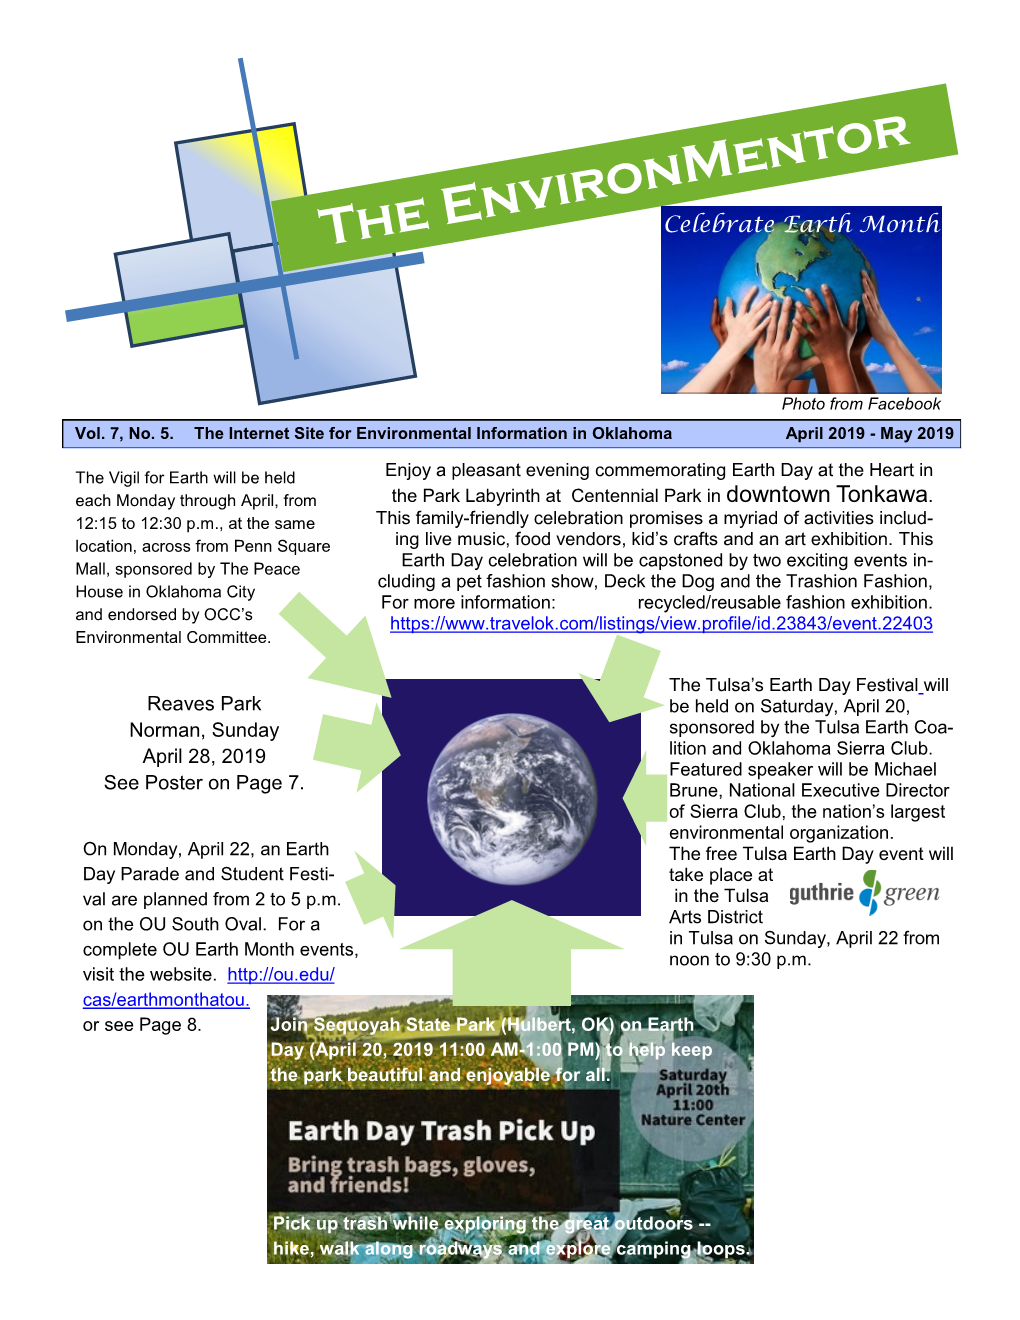 Celebrate Earth Month